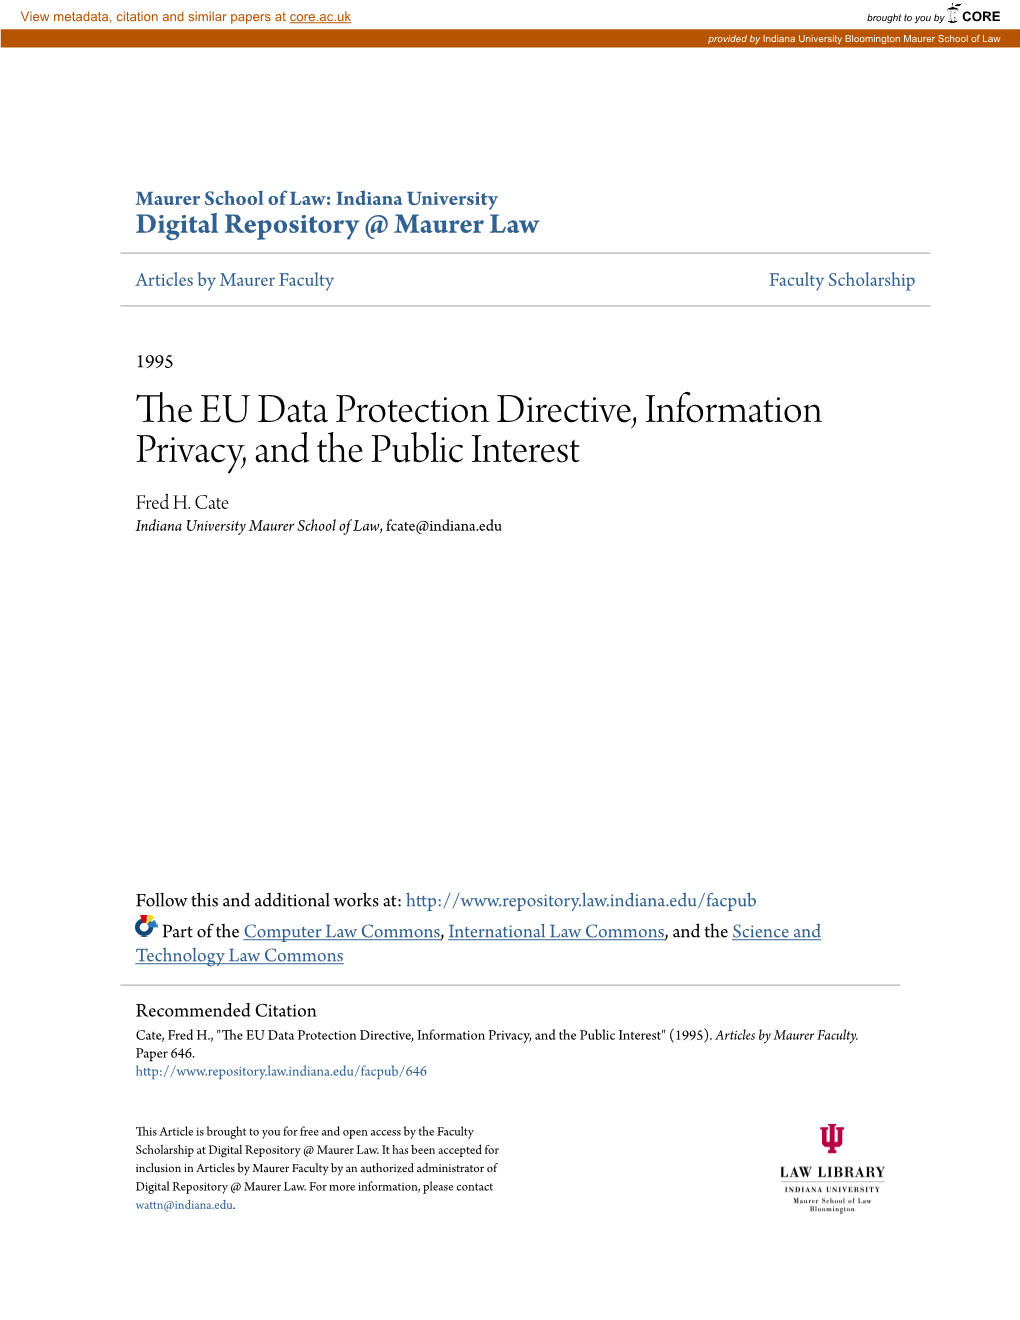 The EU Data Protection Directive, Information Privacy, and the Public Interest